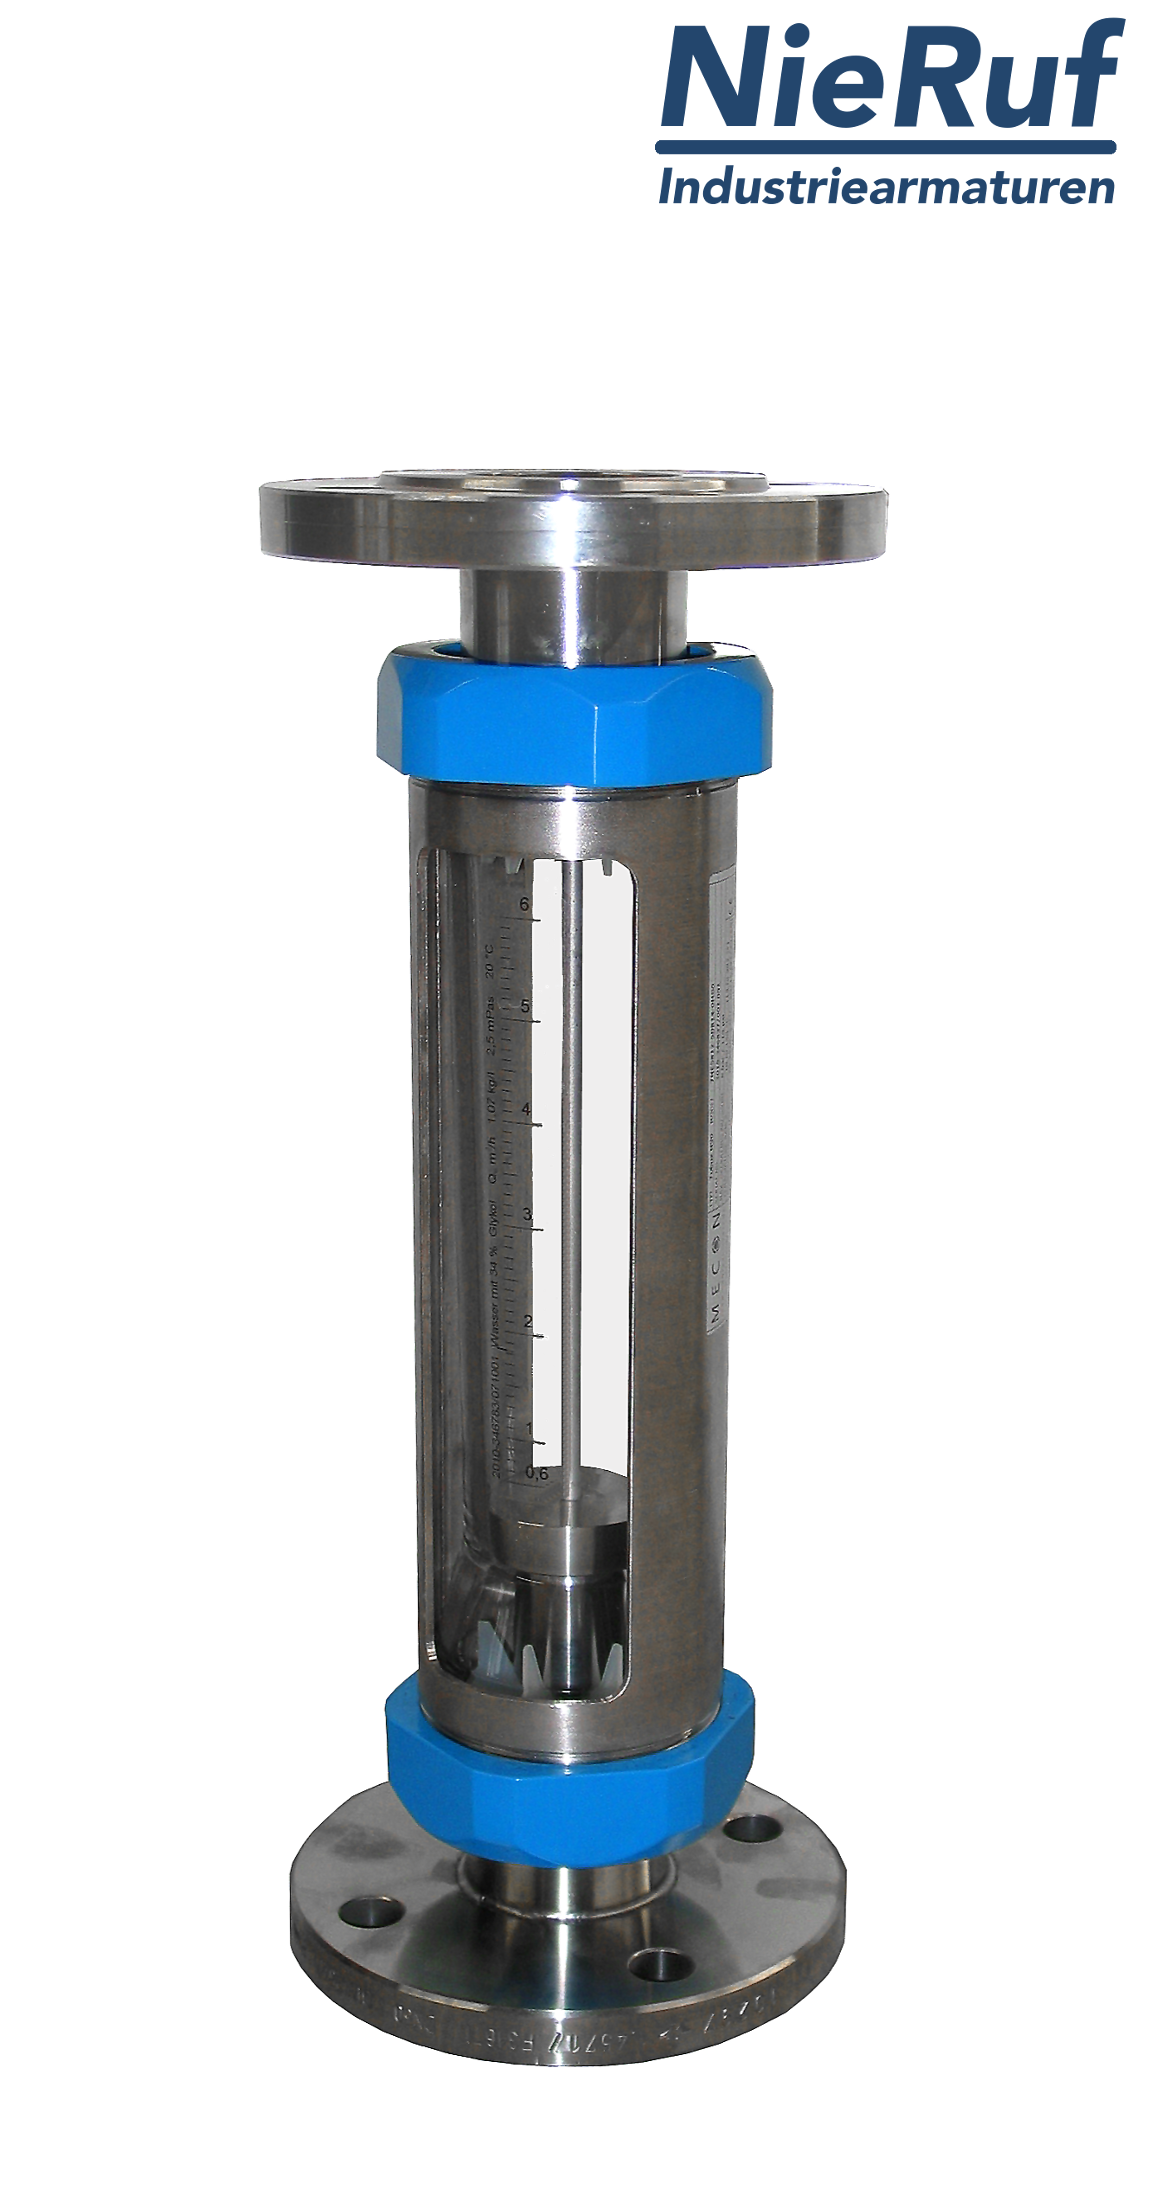 Variable area flowmeter stainless steel + borosilicate flange DN25 0.5 - 5.0 l/h water FKM